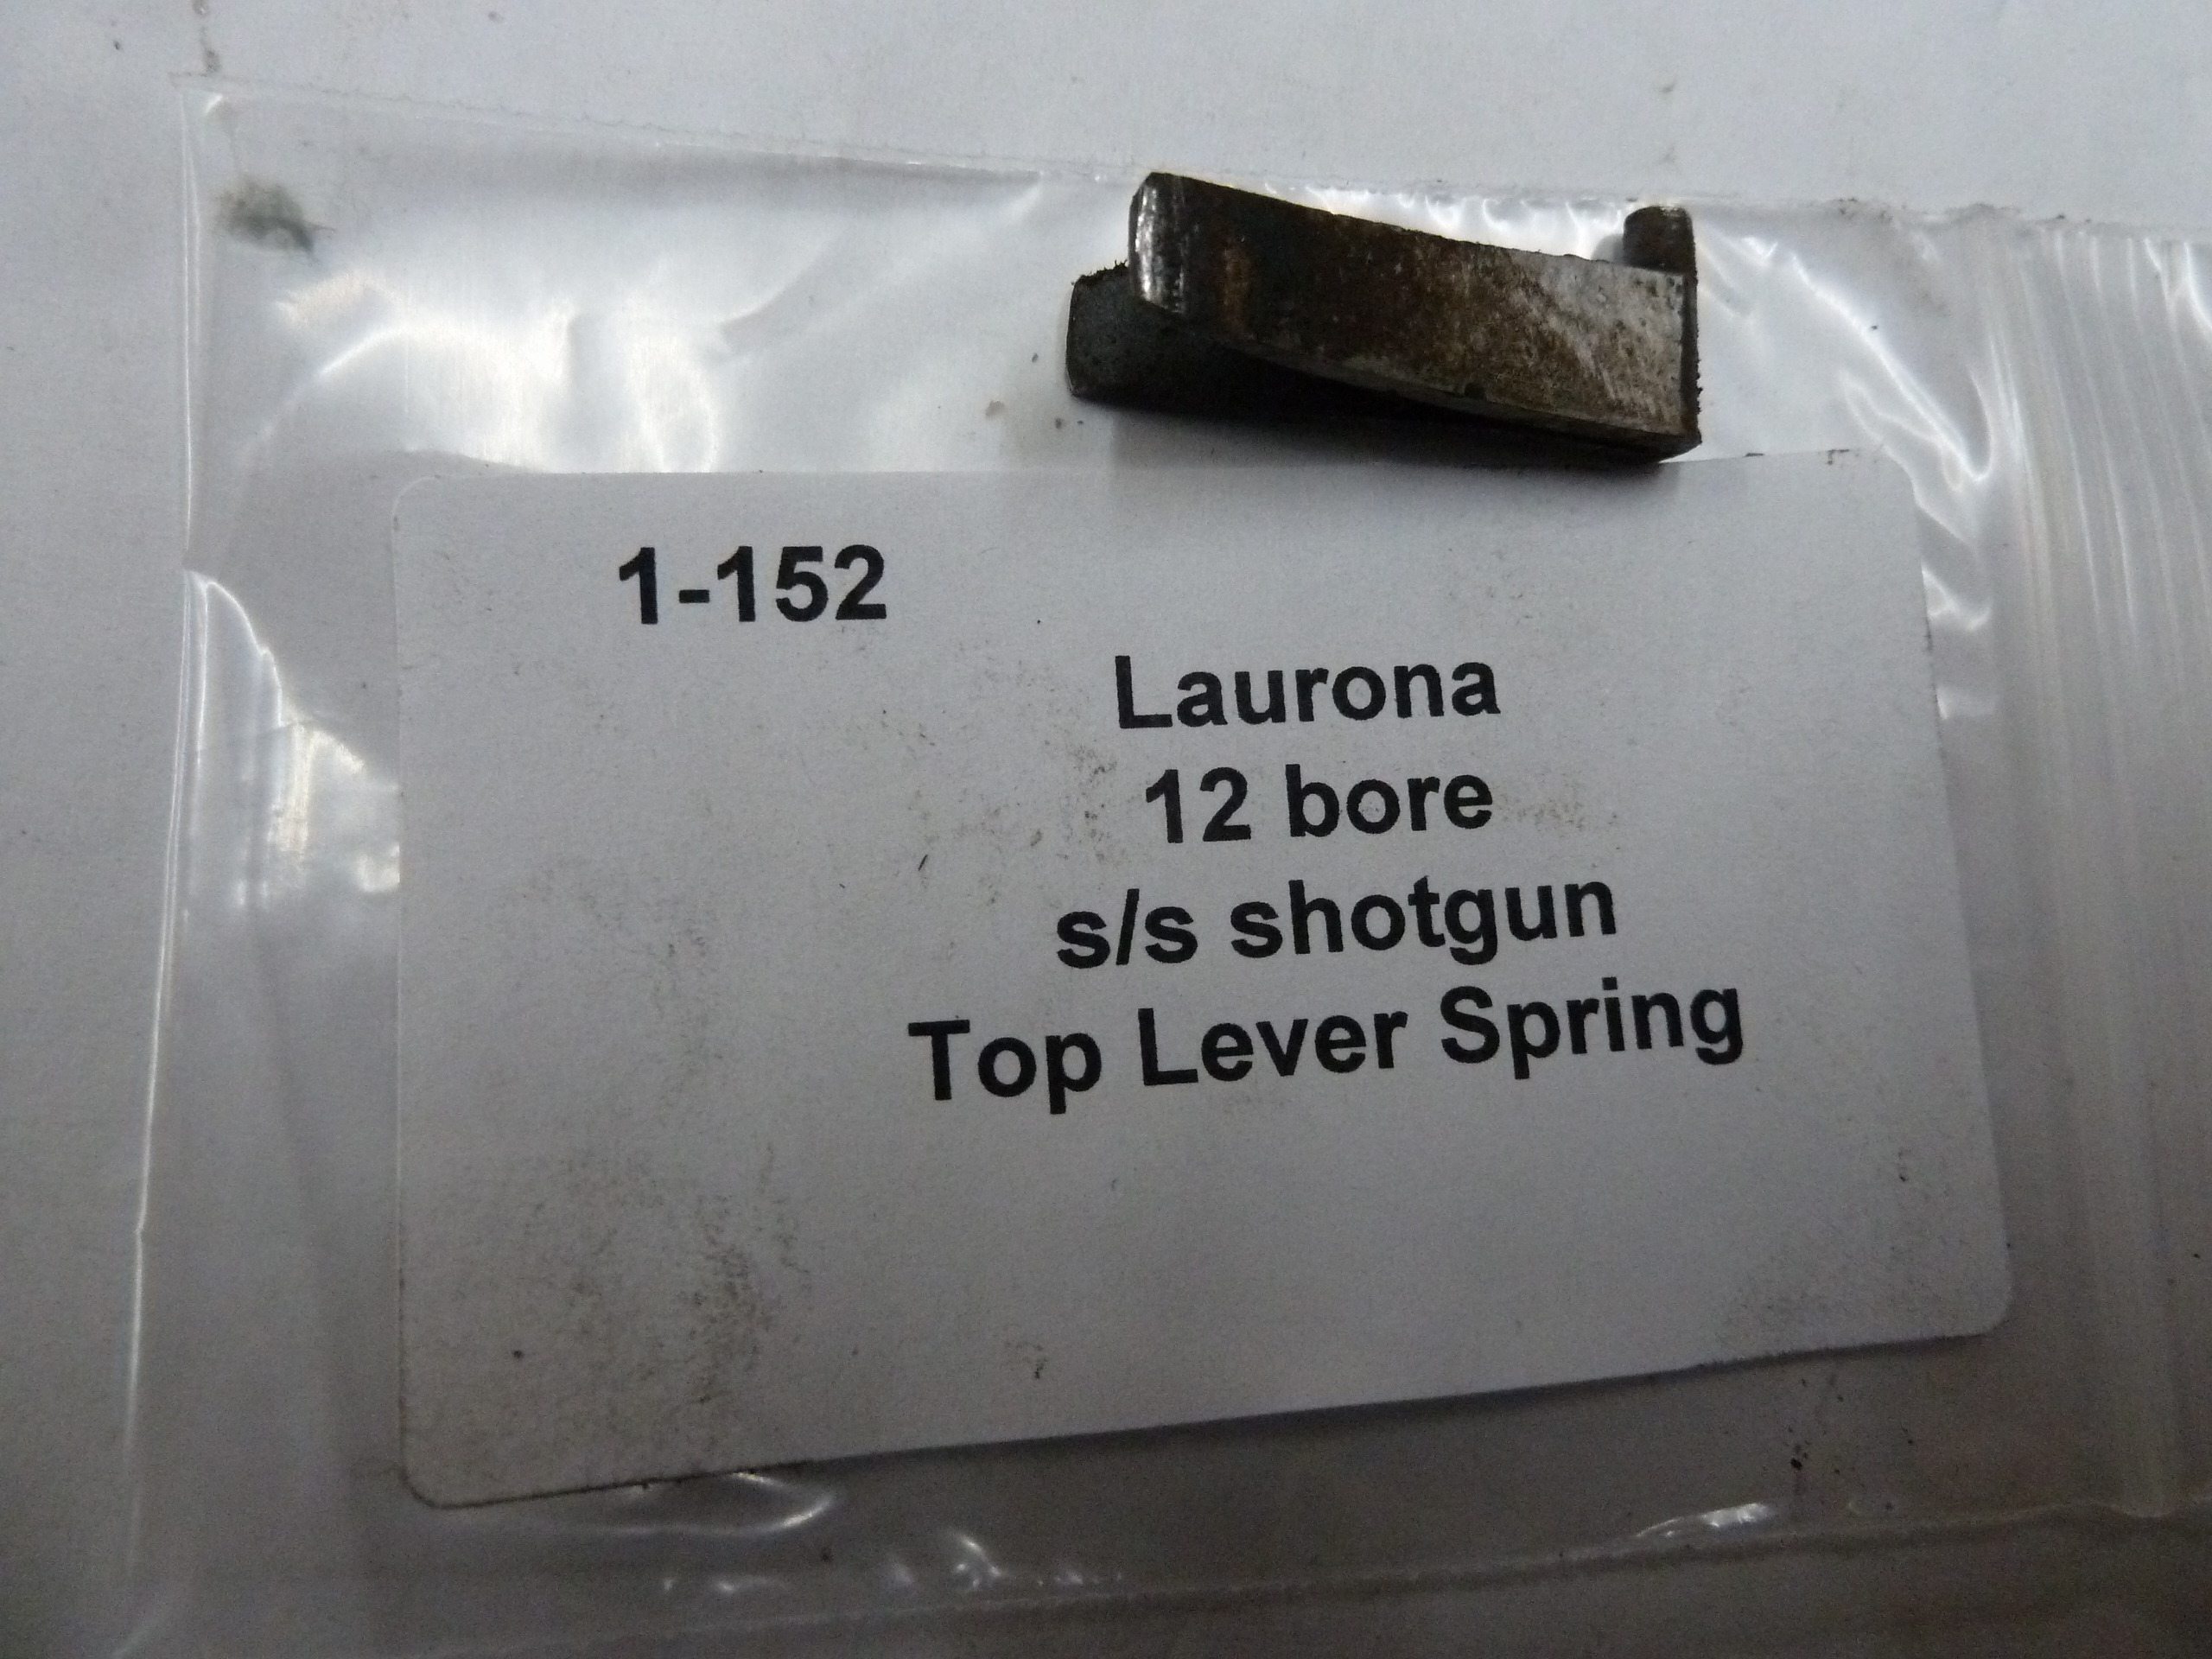 Laurona top lever spring